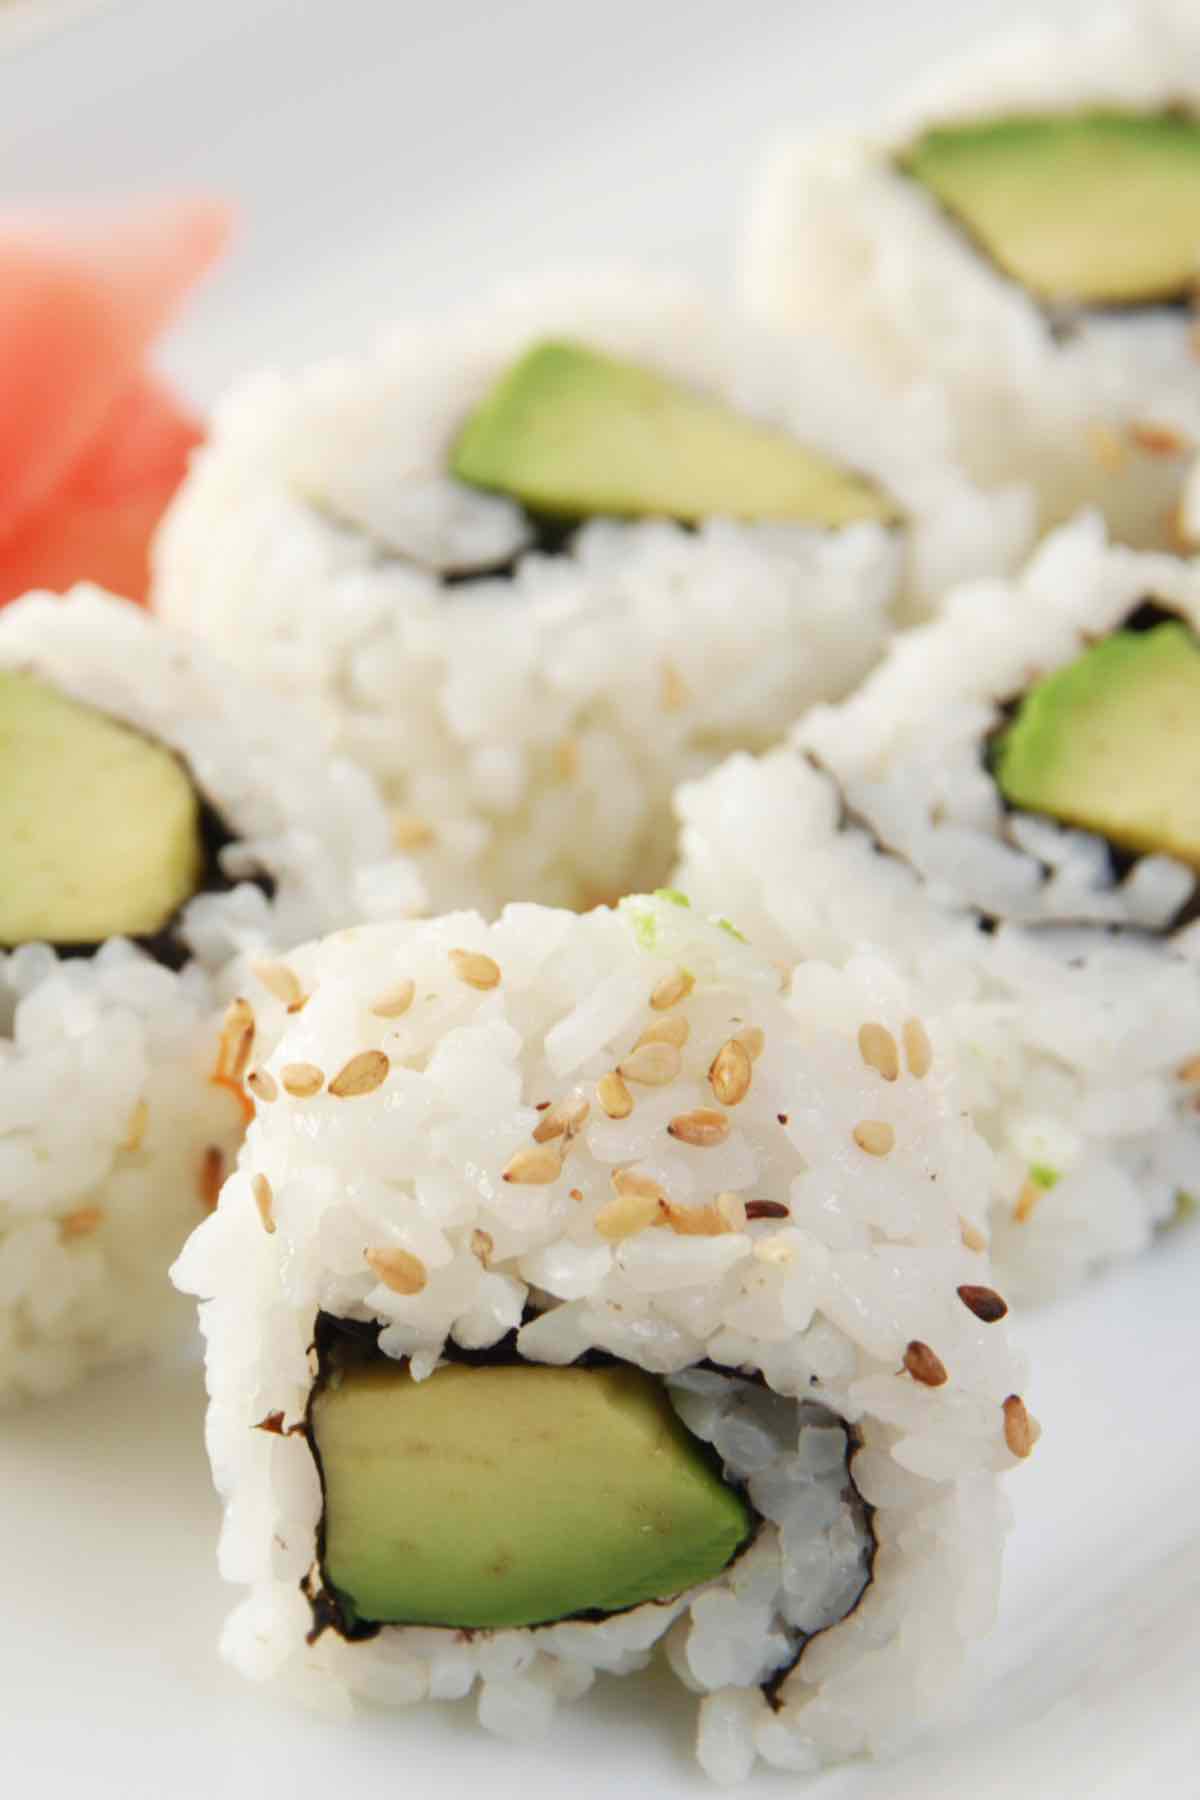 n of the popular California Roll. There’s something so satisfying about making your own sushi at home. Not only is it much cheaper than going to a restaurant, it’s also a super fun skill to learn! This creamy and delicious avocado roll recipe calls for a few simple ingredients and is easy to make at hom